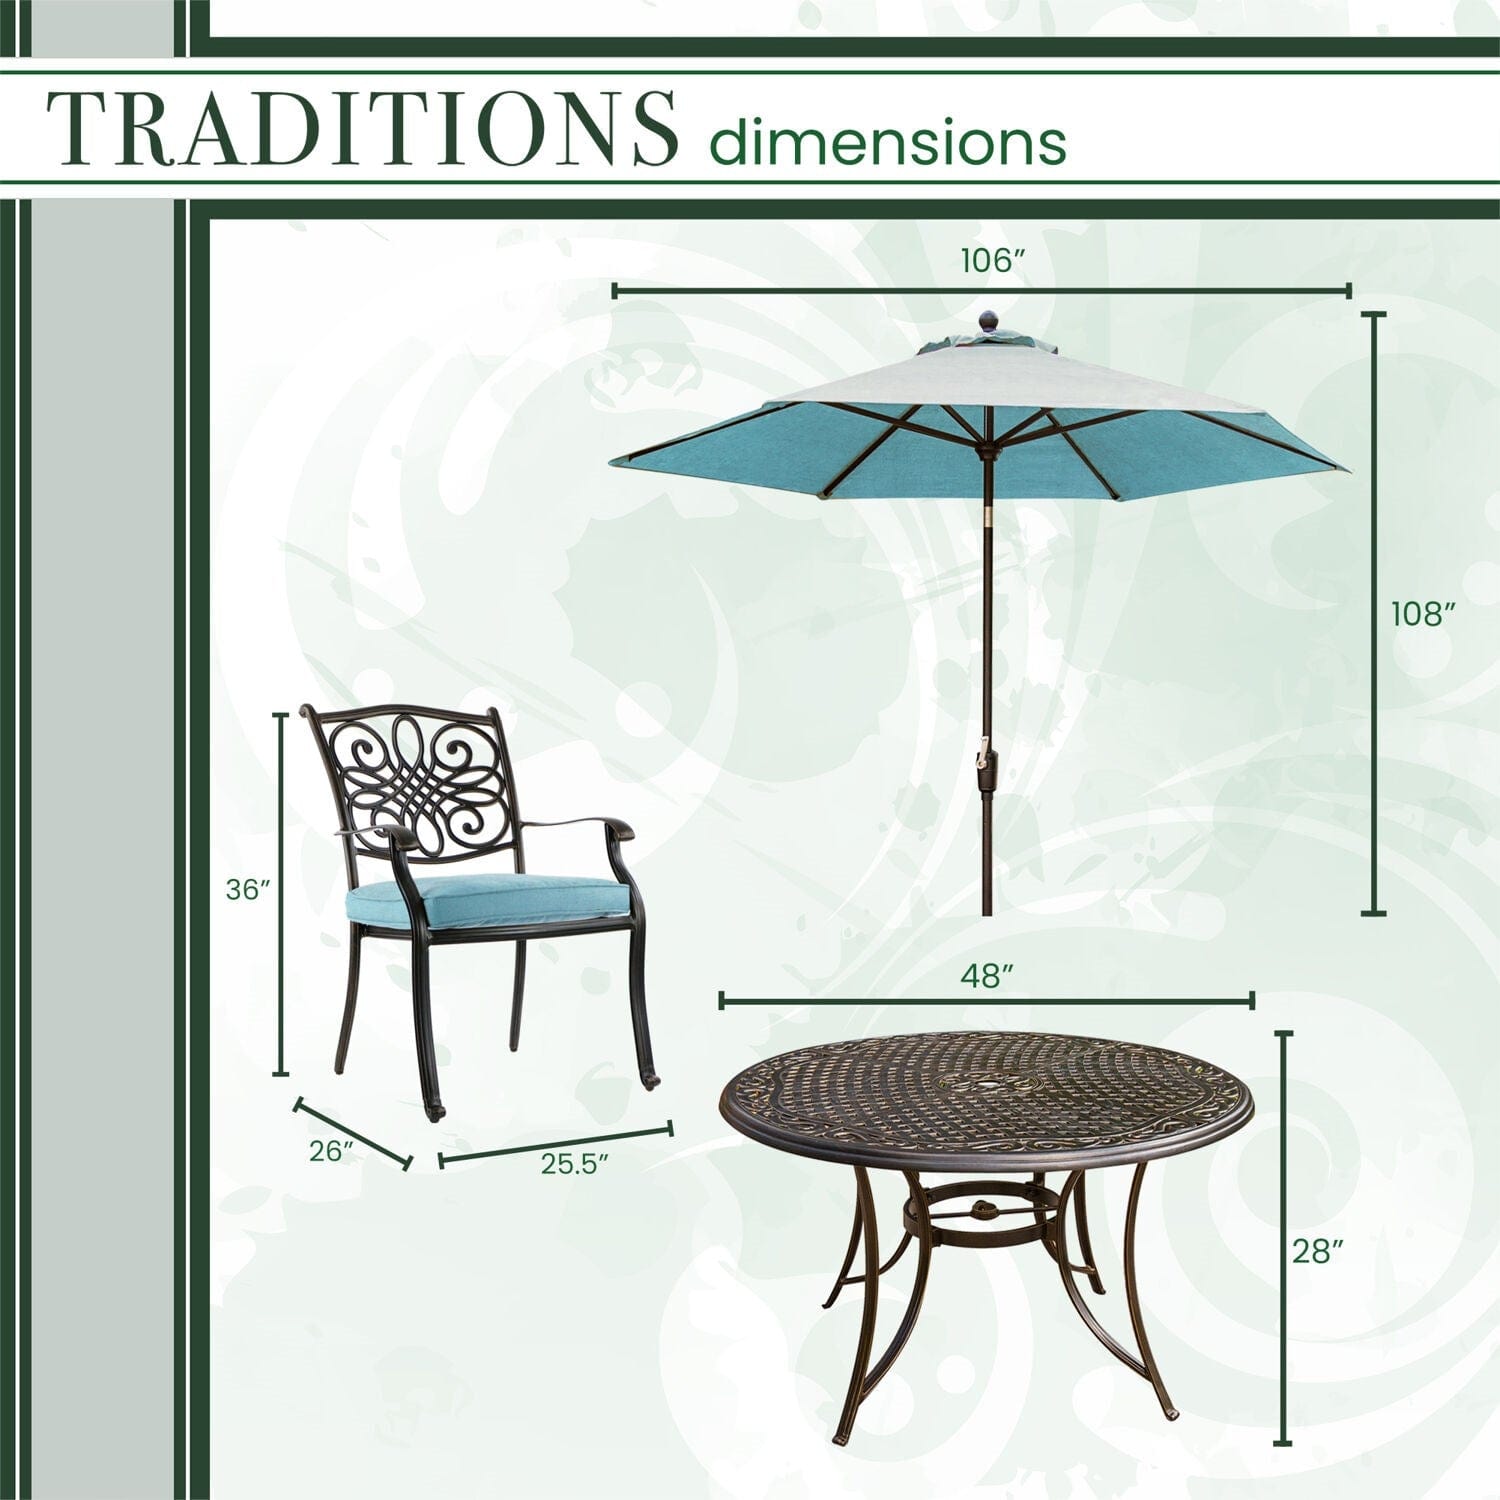 Hanover Outdoor Dining Set Hanover - Traditions 5-Piece Dining Set in Blue with Table Umbrella and Stand - TRADDN5PC-B-SU